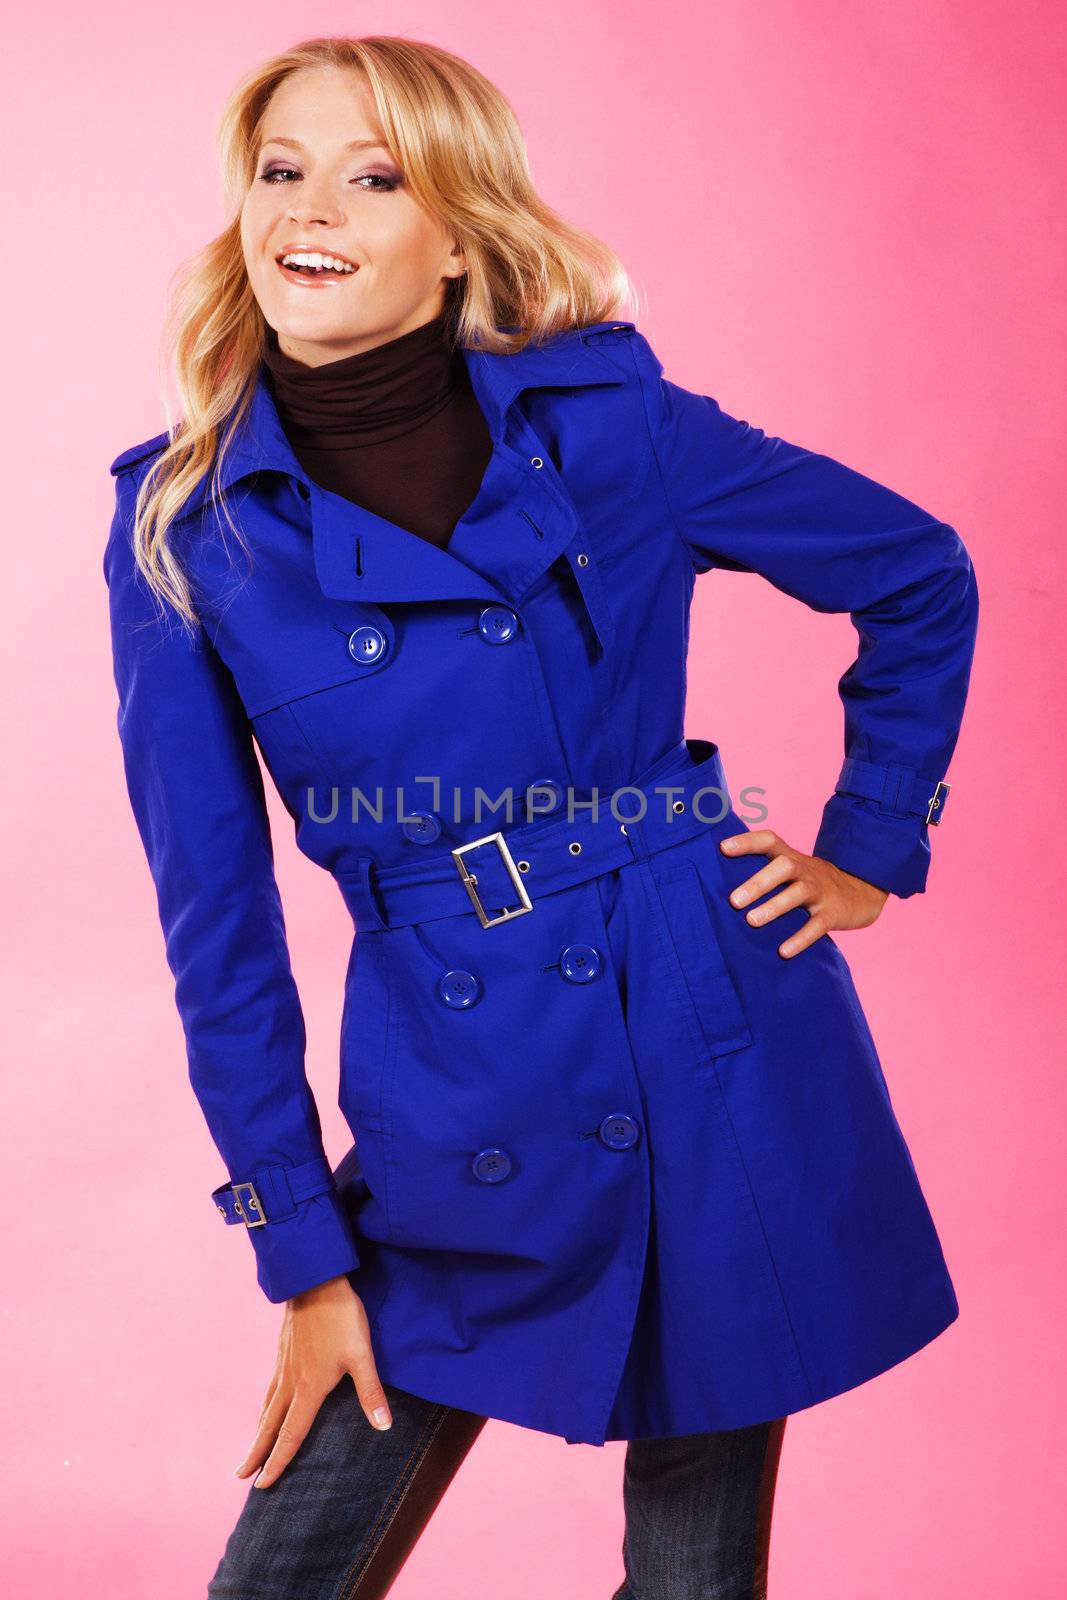 Lovely woman in a blue coat against pink background